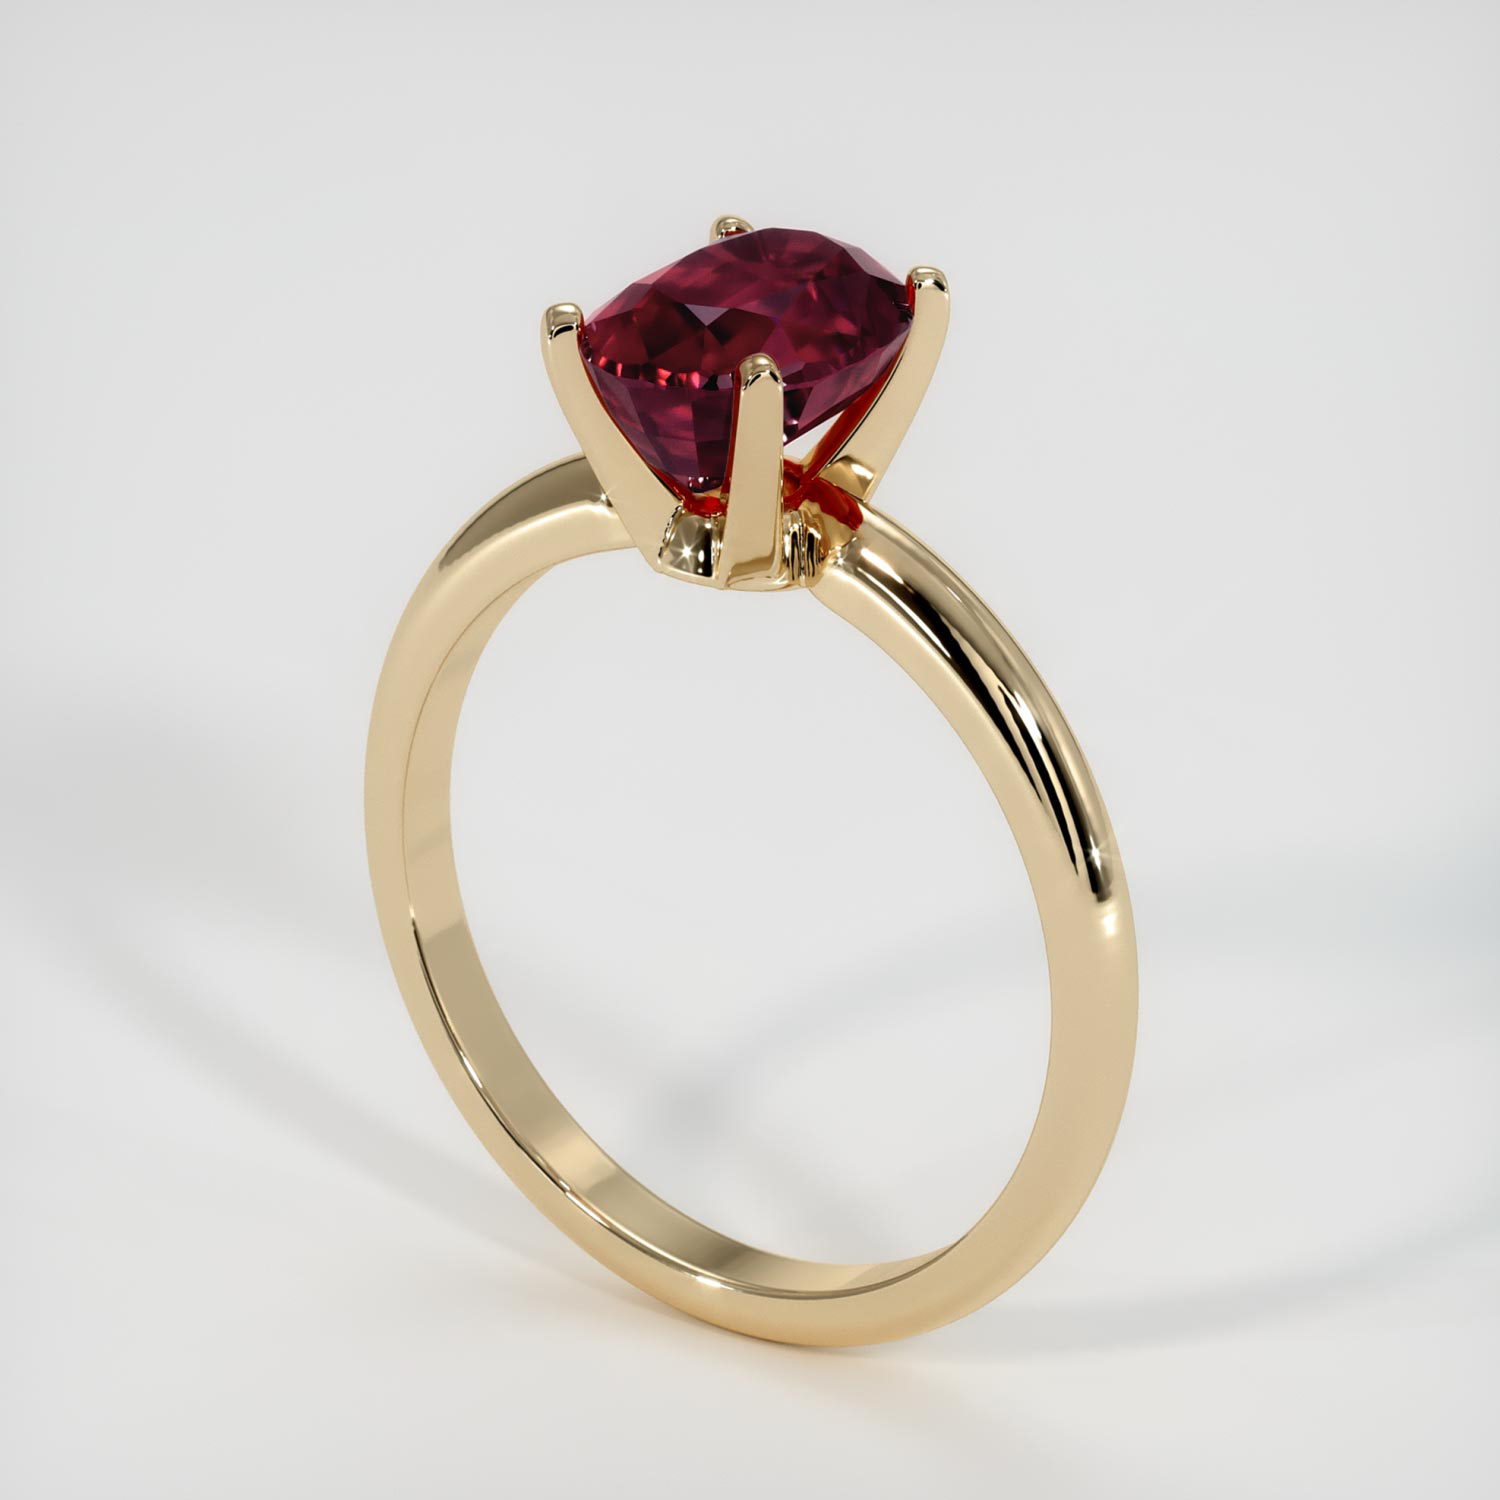 Solitaire Ruby Ring 2.02 Ct., 18K Yellow Gold